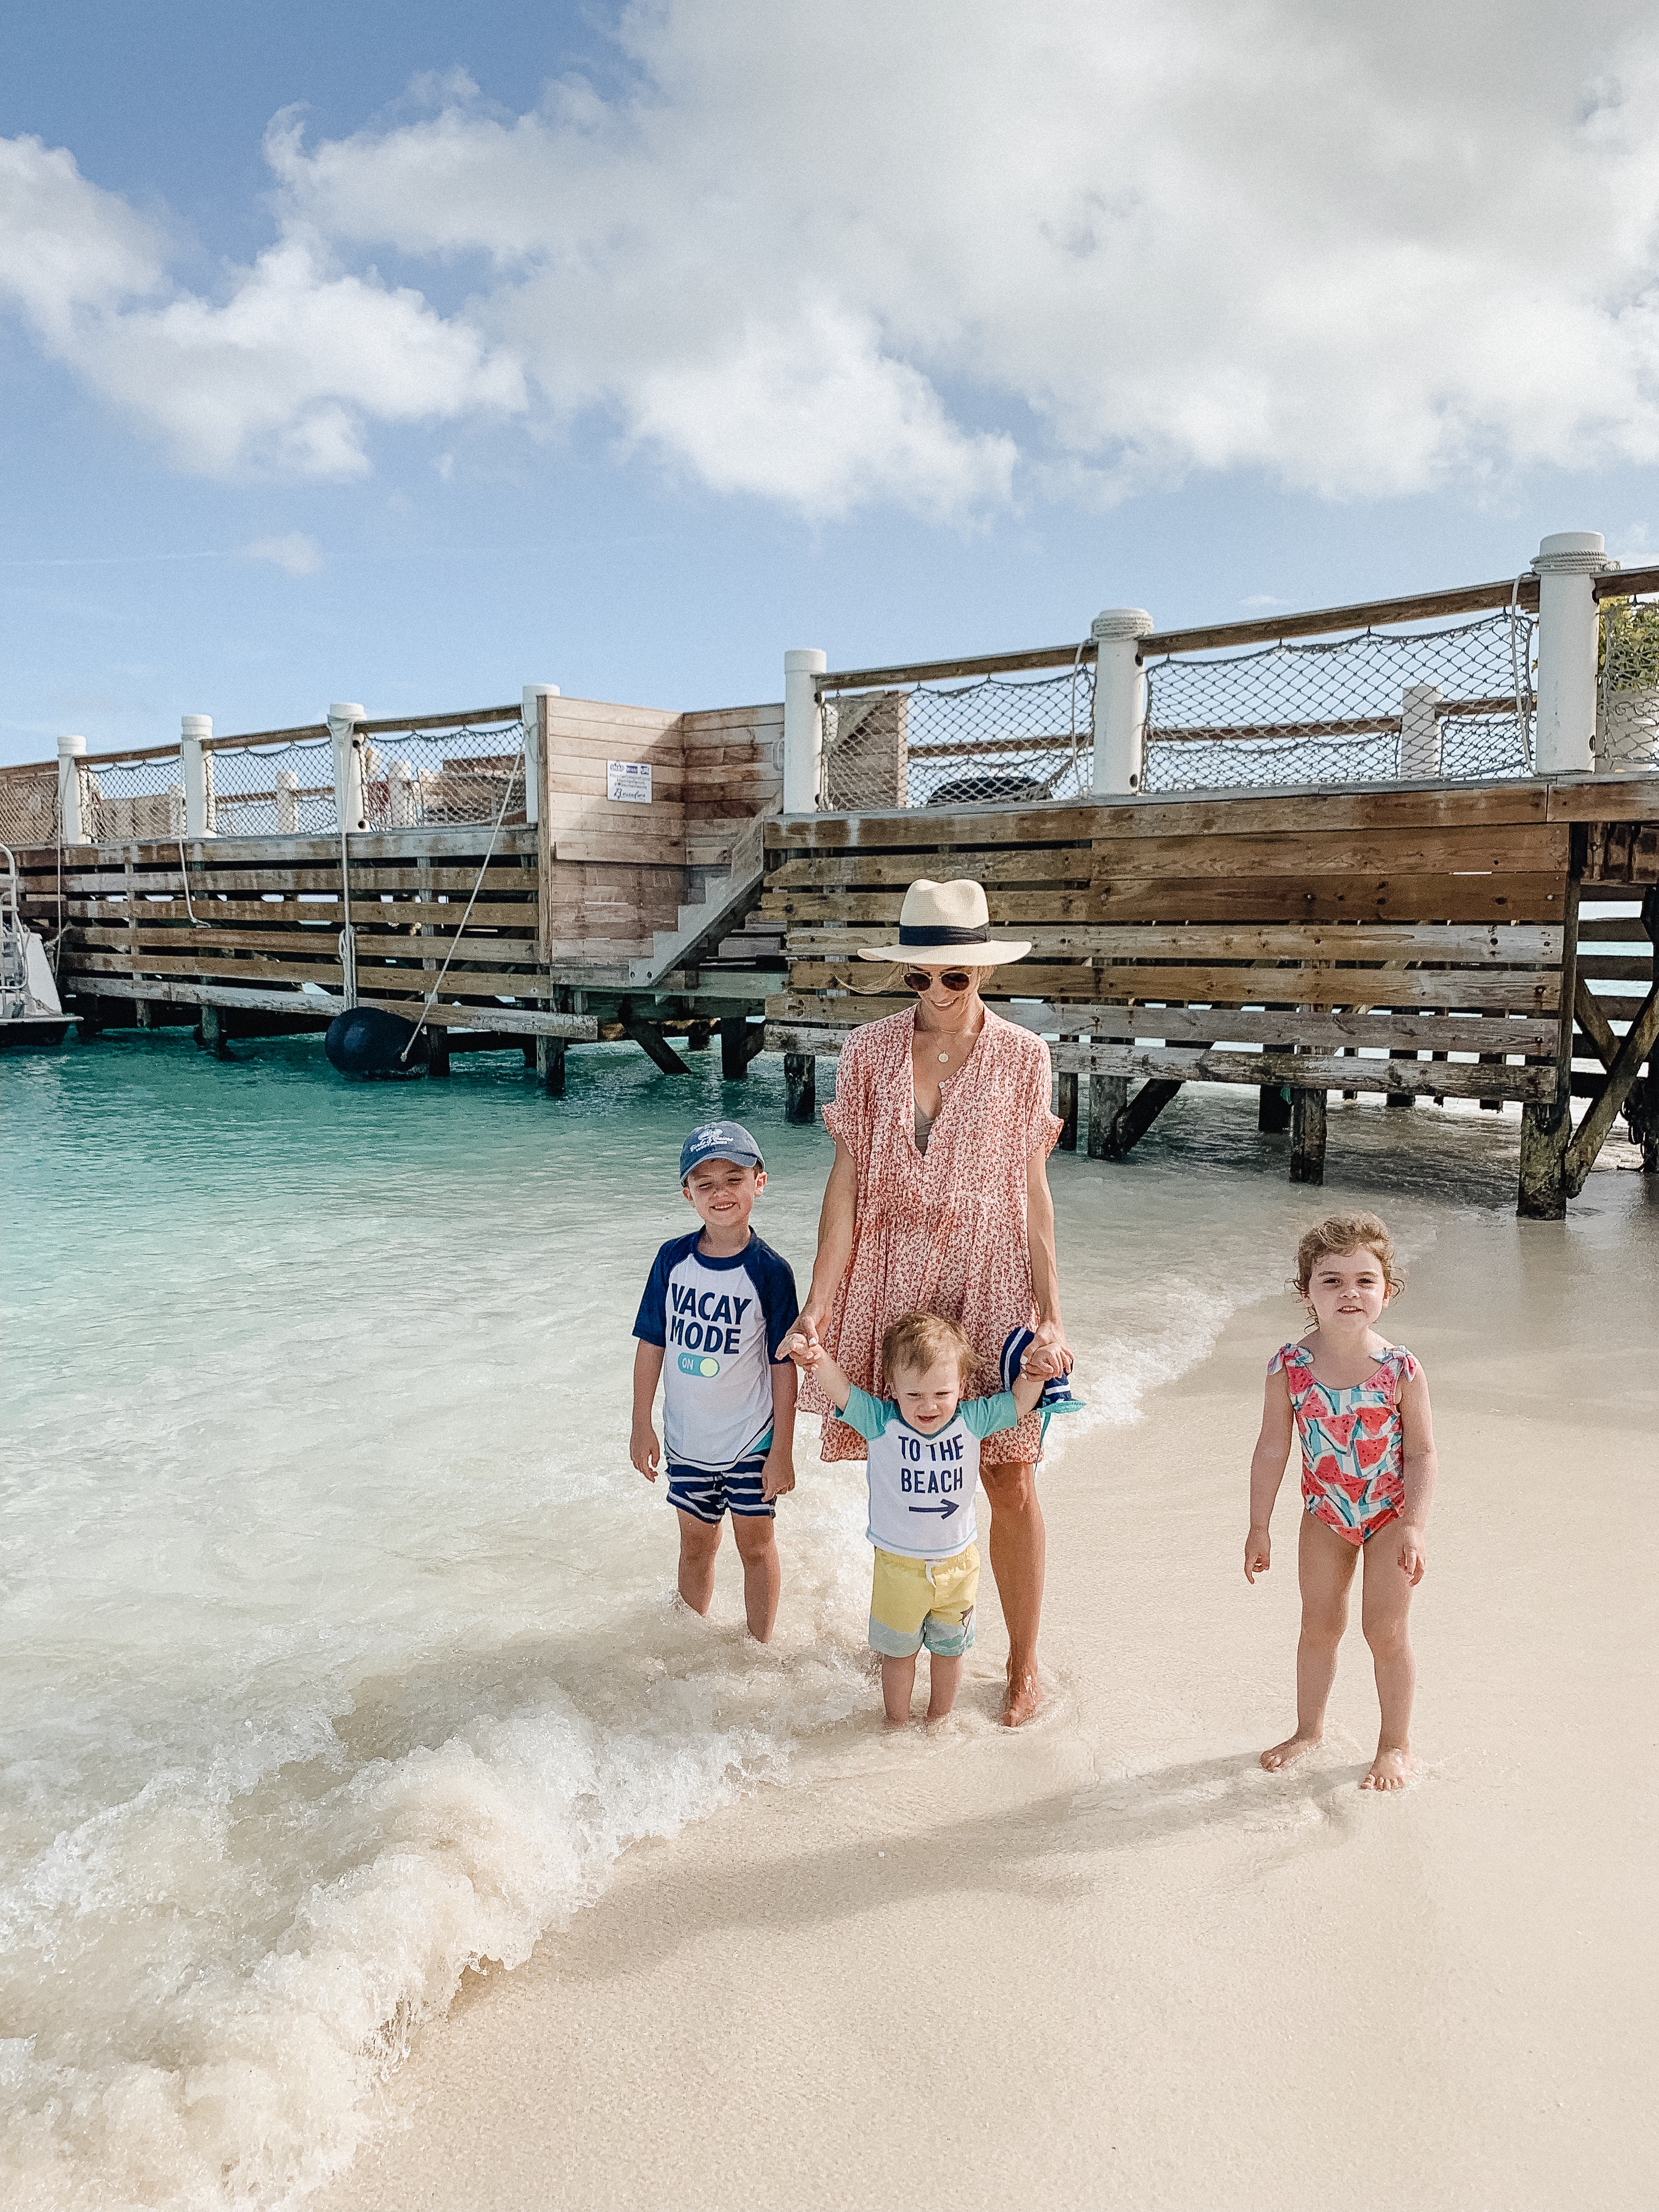 Connecticut life and style blogger Lauren McBride shares the Best Family Resort in Turks & Caicos featuring a full review of Beaches Turks & Caicos for family travel.